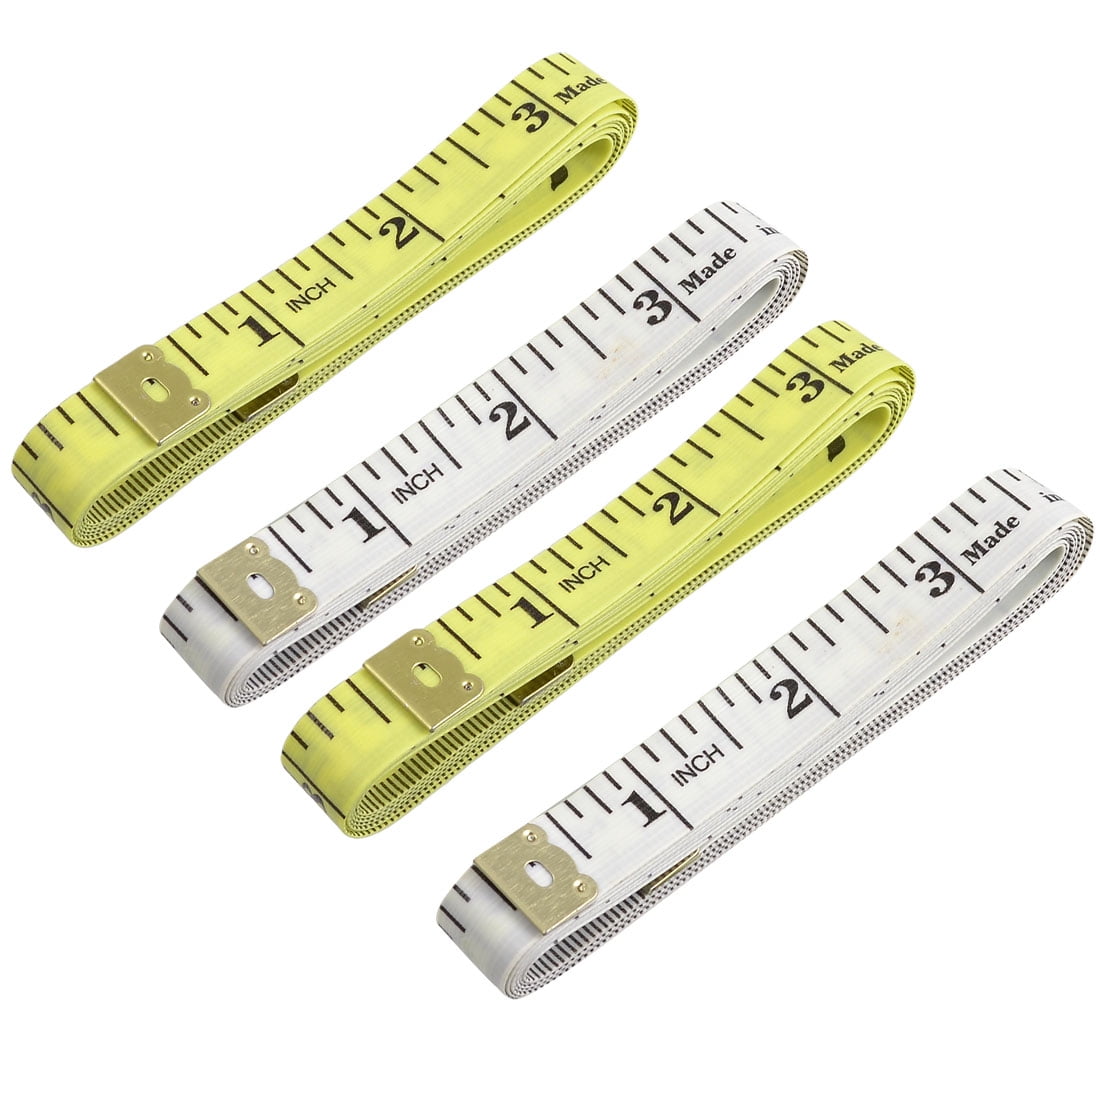 Unique Bargains 60-Inch Inch/Metric Tape Measure Sewing Tailor Cloth ...